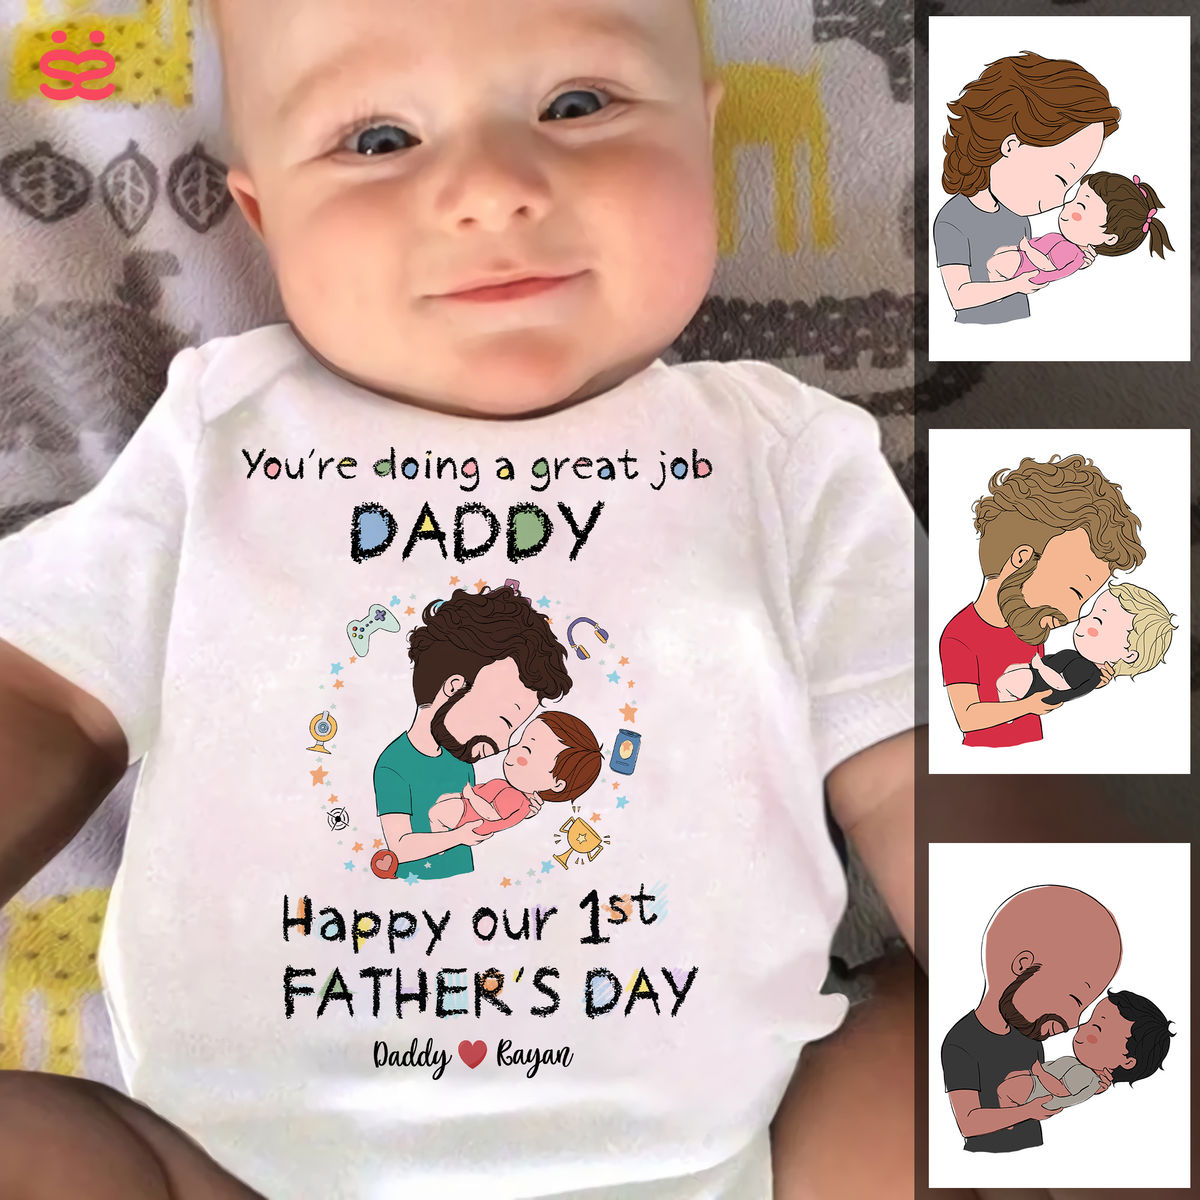 You're doing a great job daddy Happy 1st Father's Day - Baby Shower Gift